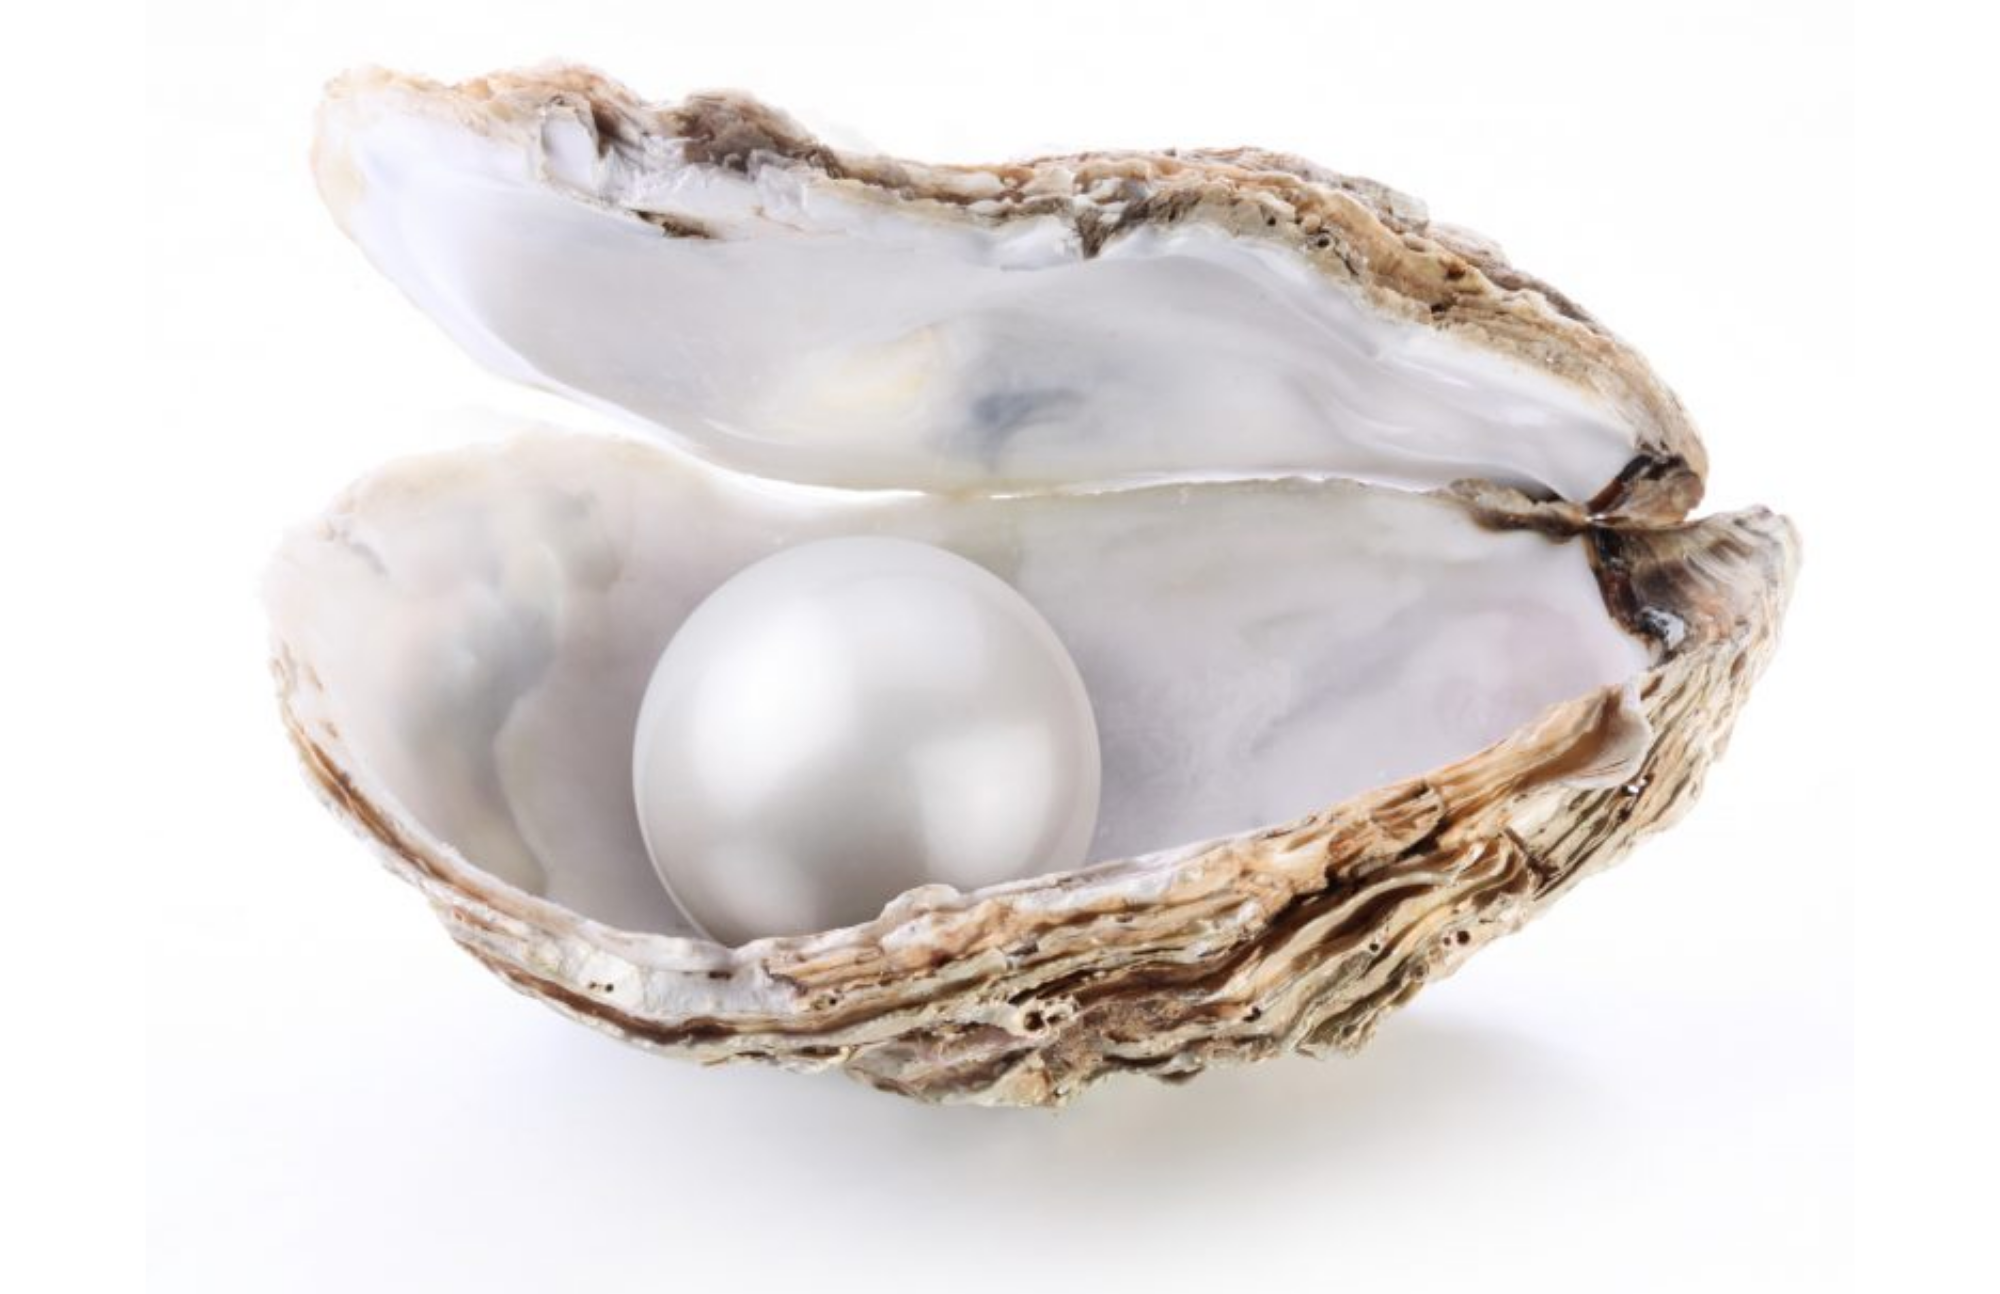 A pearl inside its oyster seashell